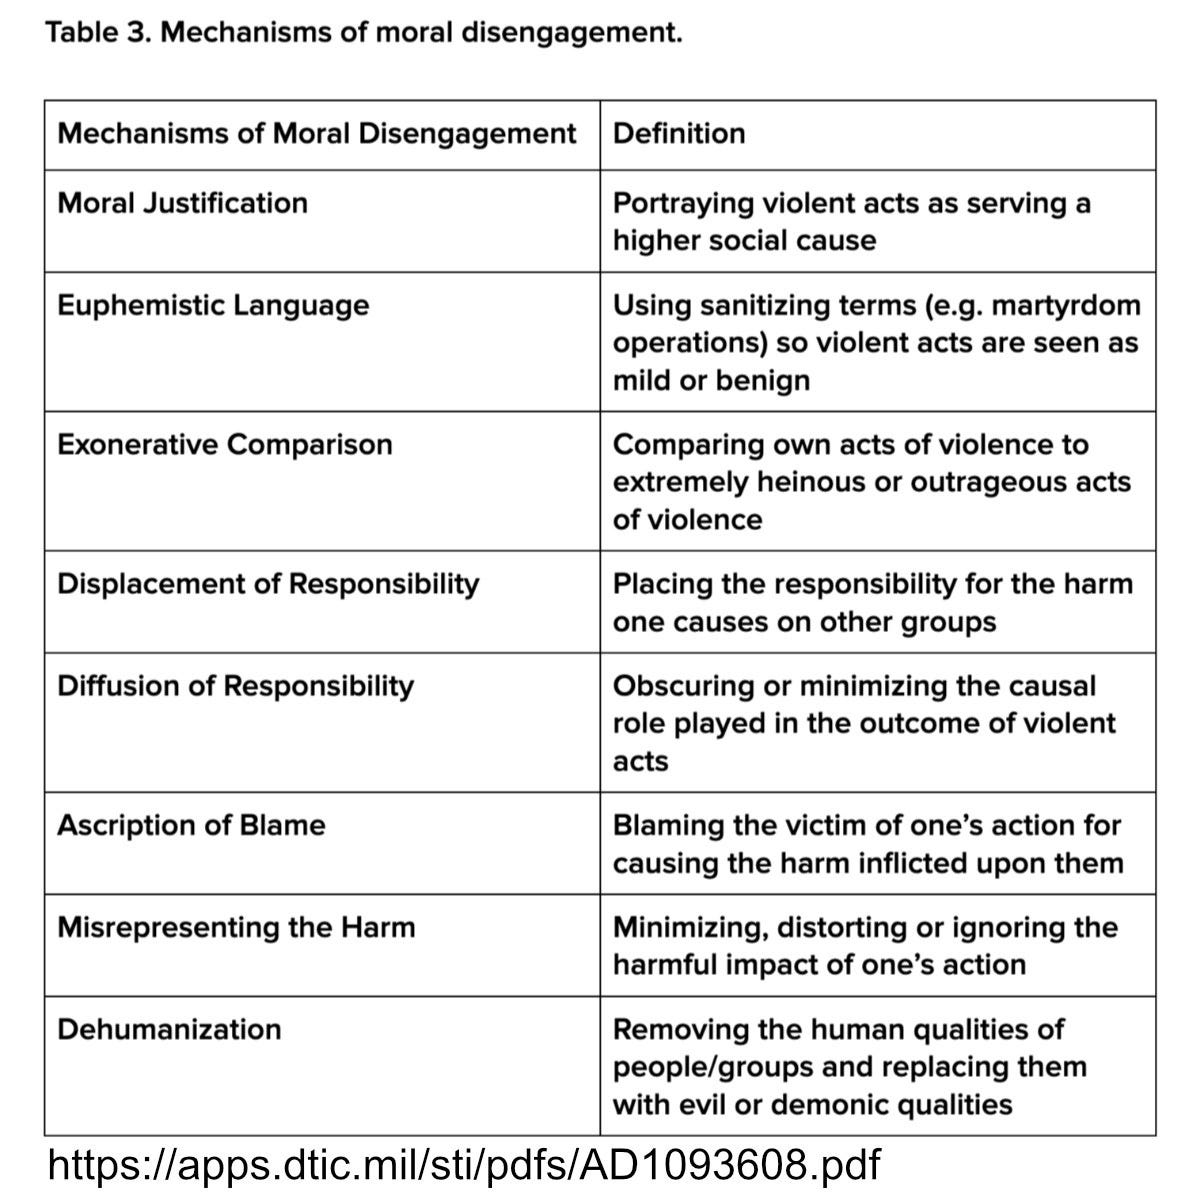 Table 3. Mechanisms of moral disengagement. Definition Moral Justification Portraying violent acts as serving a higher social cause Euphemistic Language Using sanitizing terms (e.g. martyrdom operations) so violent acts are seen as mild or benign Exonerative Comparison Comparing own acts of violence to extremely heinous or outrageous acts of violence Displacement of Responsibility Placing the responsibility for the harm one causes on other groups Diffusion of Responsibility Obscuring or minimizing the causal role played in the outcome of violent acts Ascription of Blame Blaming the victim of one’s action for causing the harm inflicted upon them Misrepresenting the Harm Minimizing, distorting or ignoring the harmful impact of one’s action Dehumanization Removing the human qualities of people/groups and replacing them with evil or demonic qualities https://apps.dtic.mil/sti/pdfs/AD1093608.pdf 